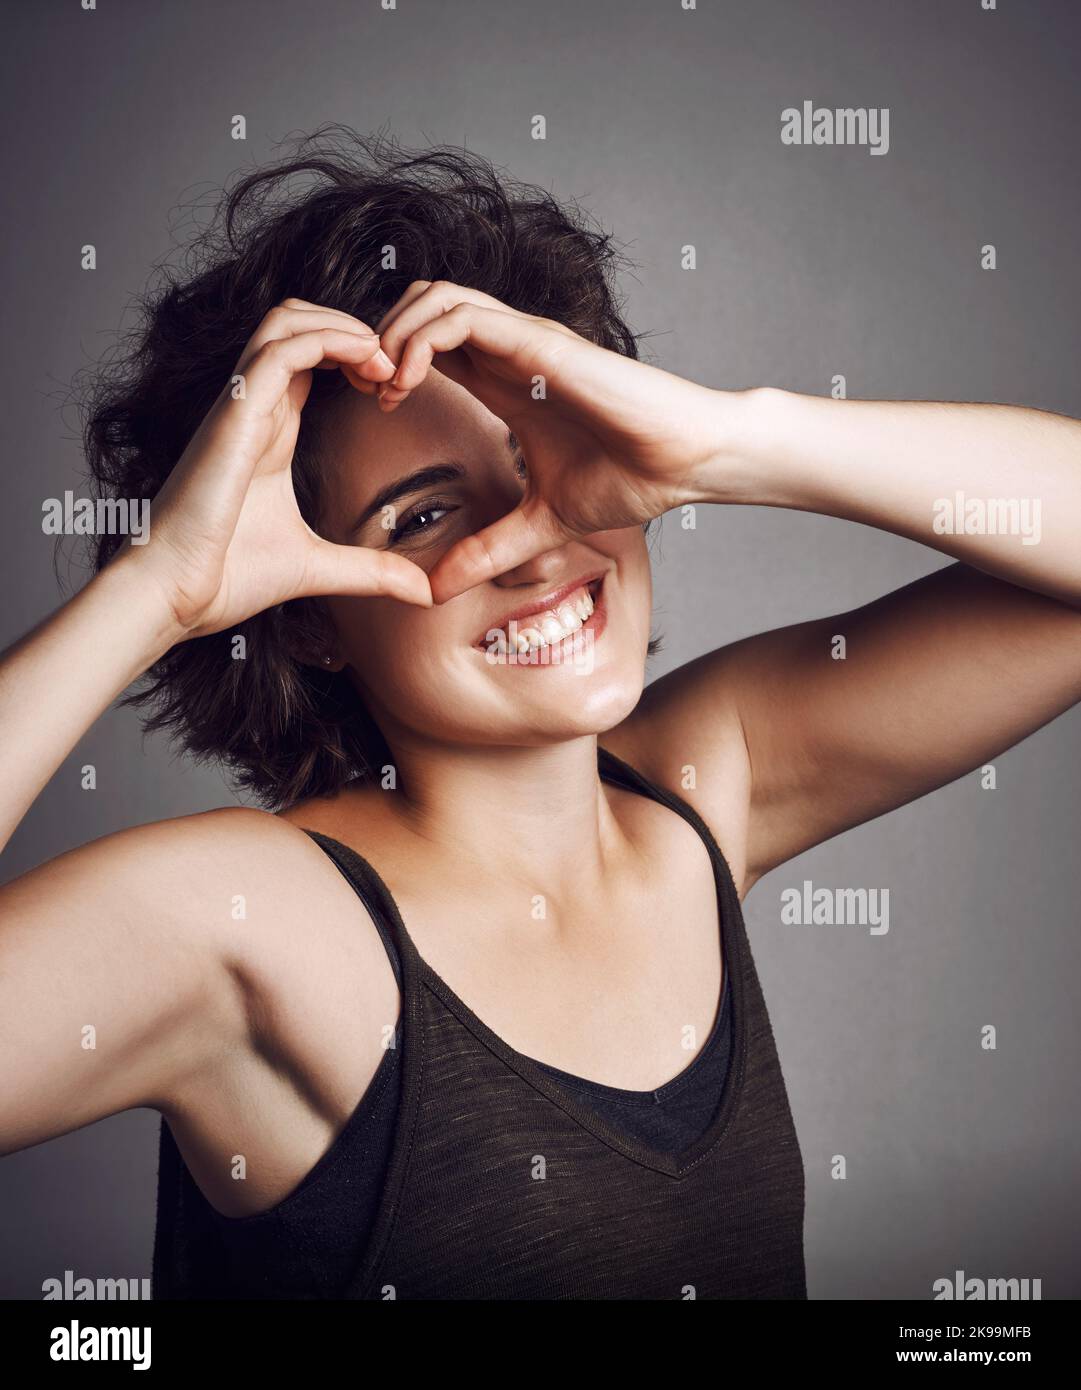 Youll always be in my heart. Studio portrait of an attractive young woman making a heart shape on her eye against a grey background. Stock Photo